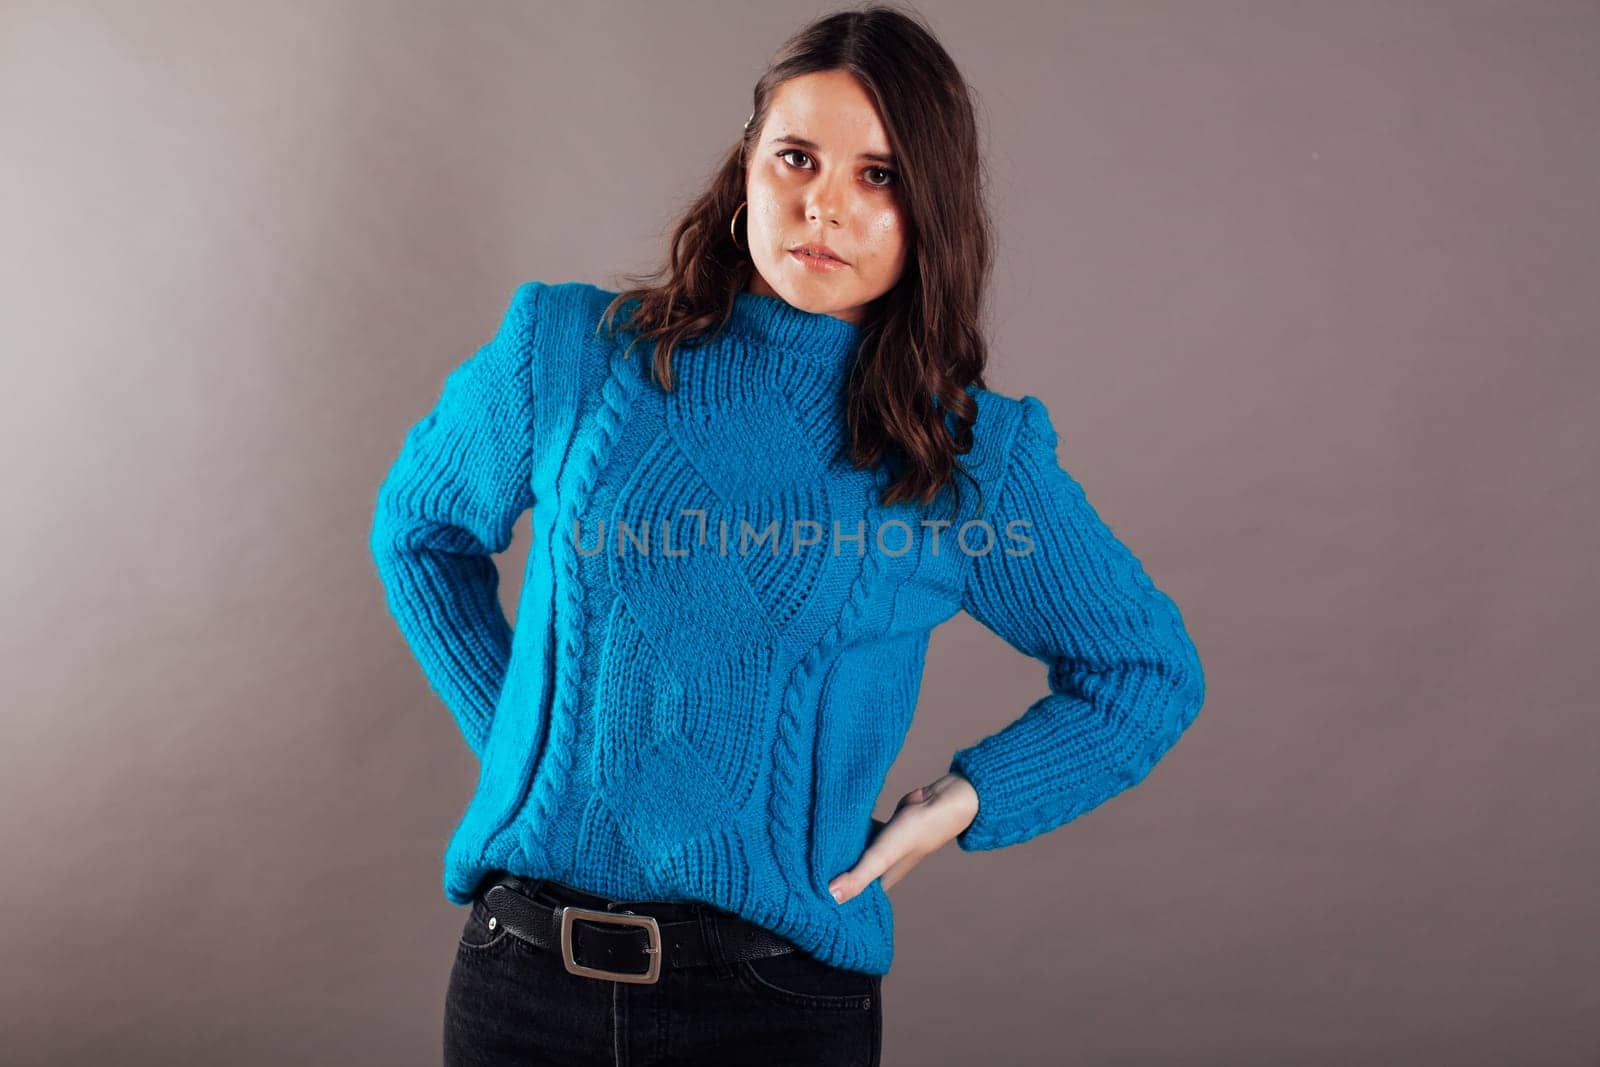 woman in a blue sweater poses on a gray background